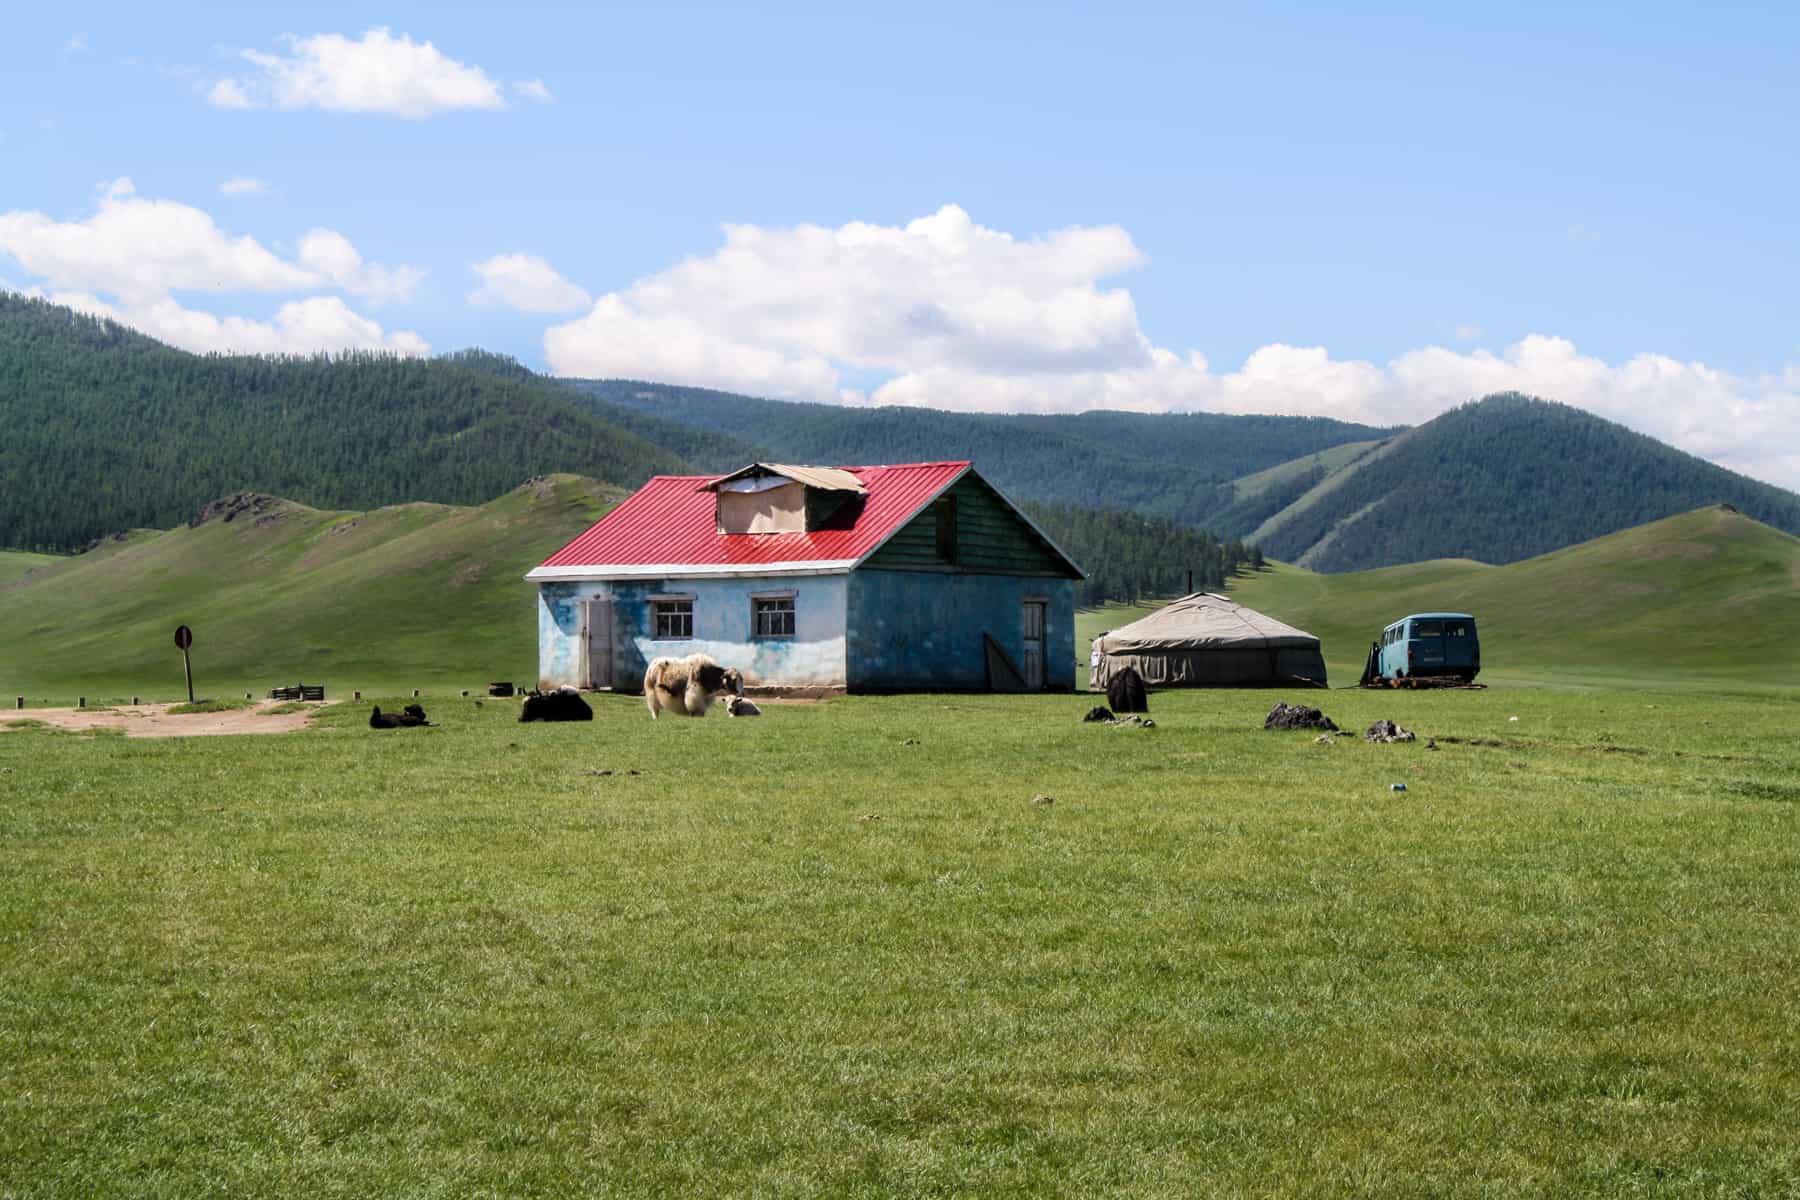 A blue house with a red roof and a white Ger sit isolated in Mongolia's Orkhon Valley